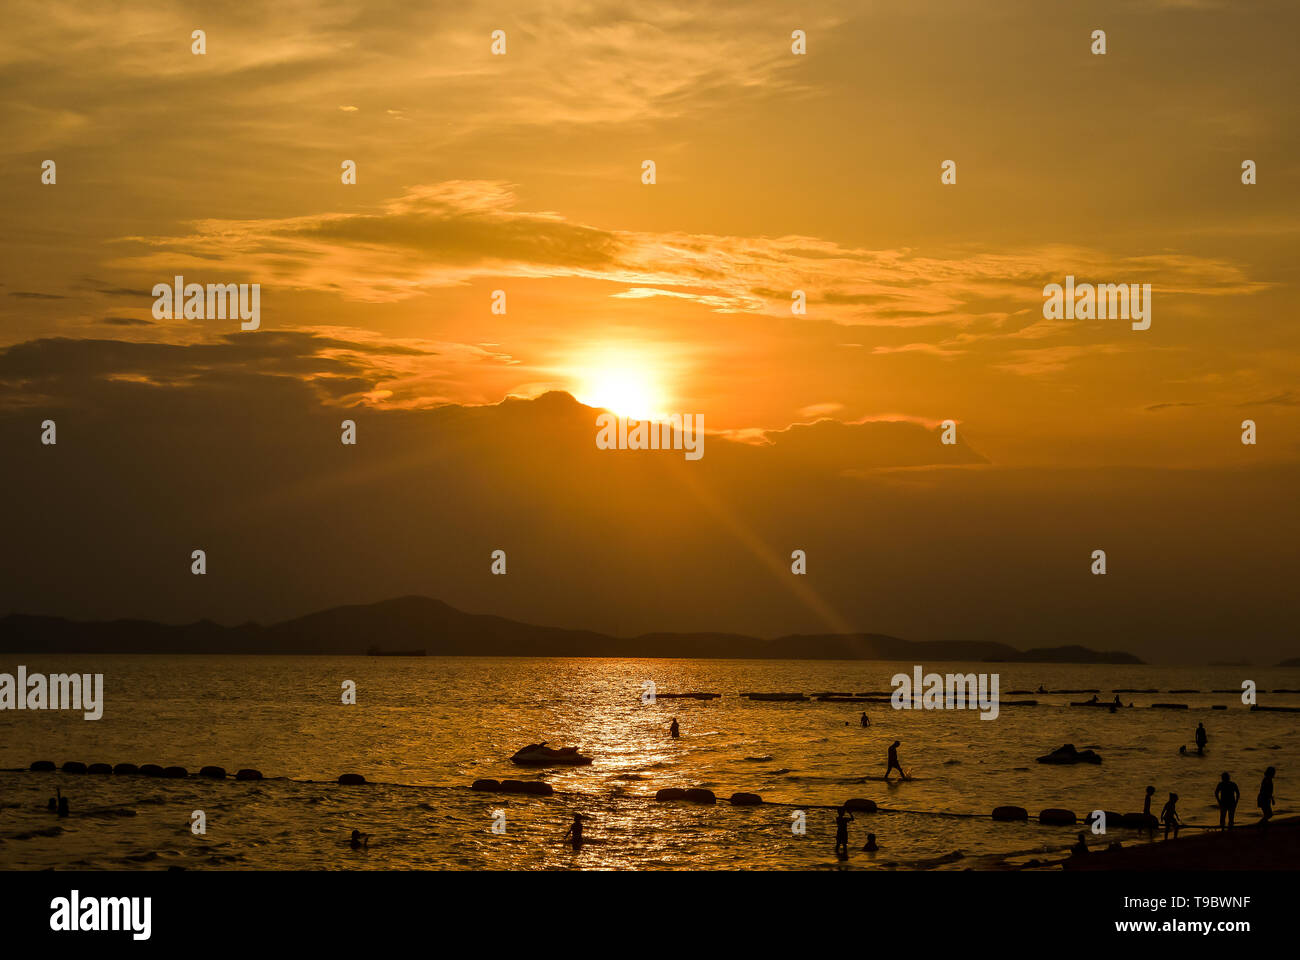 Beach sunset with silhouette people sandy on the tropical sea island summer colorful golden hour sky with sun over mountain background Stock Photo